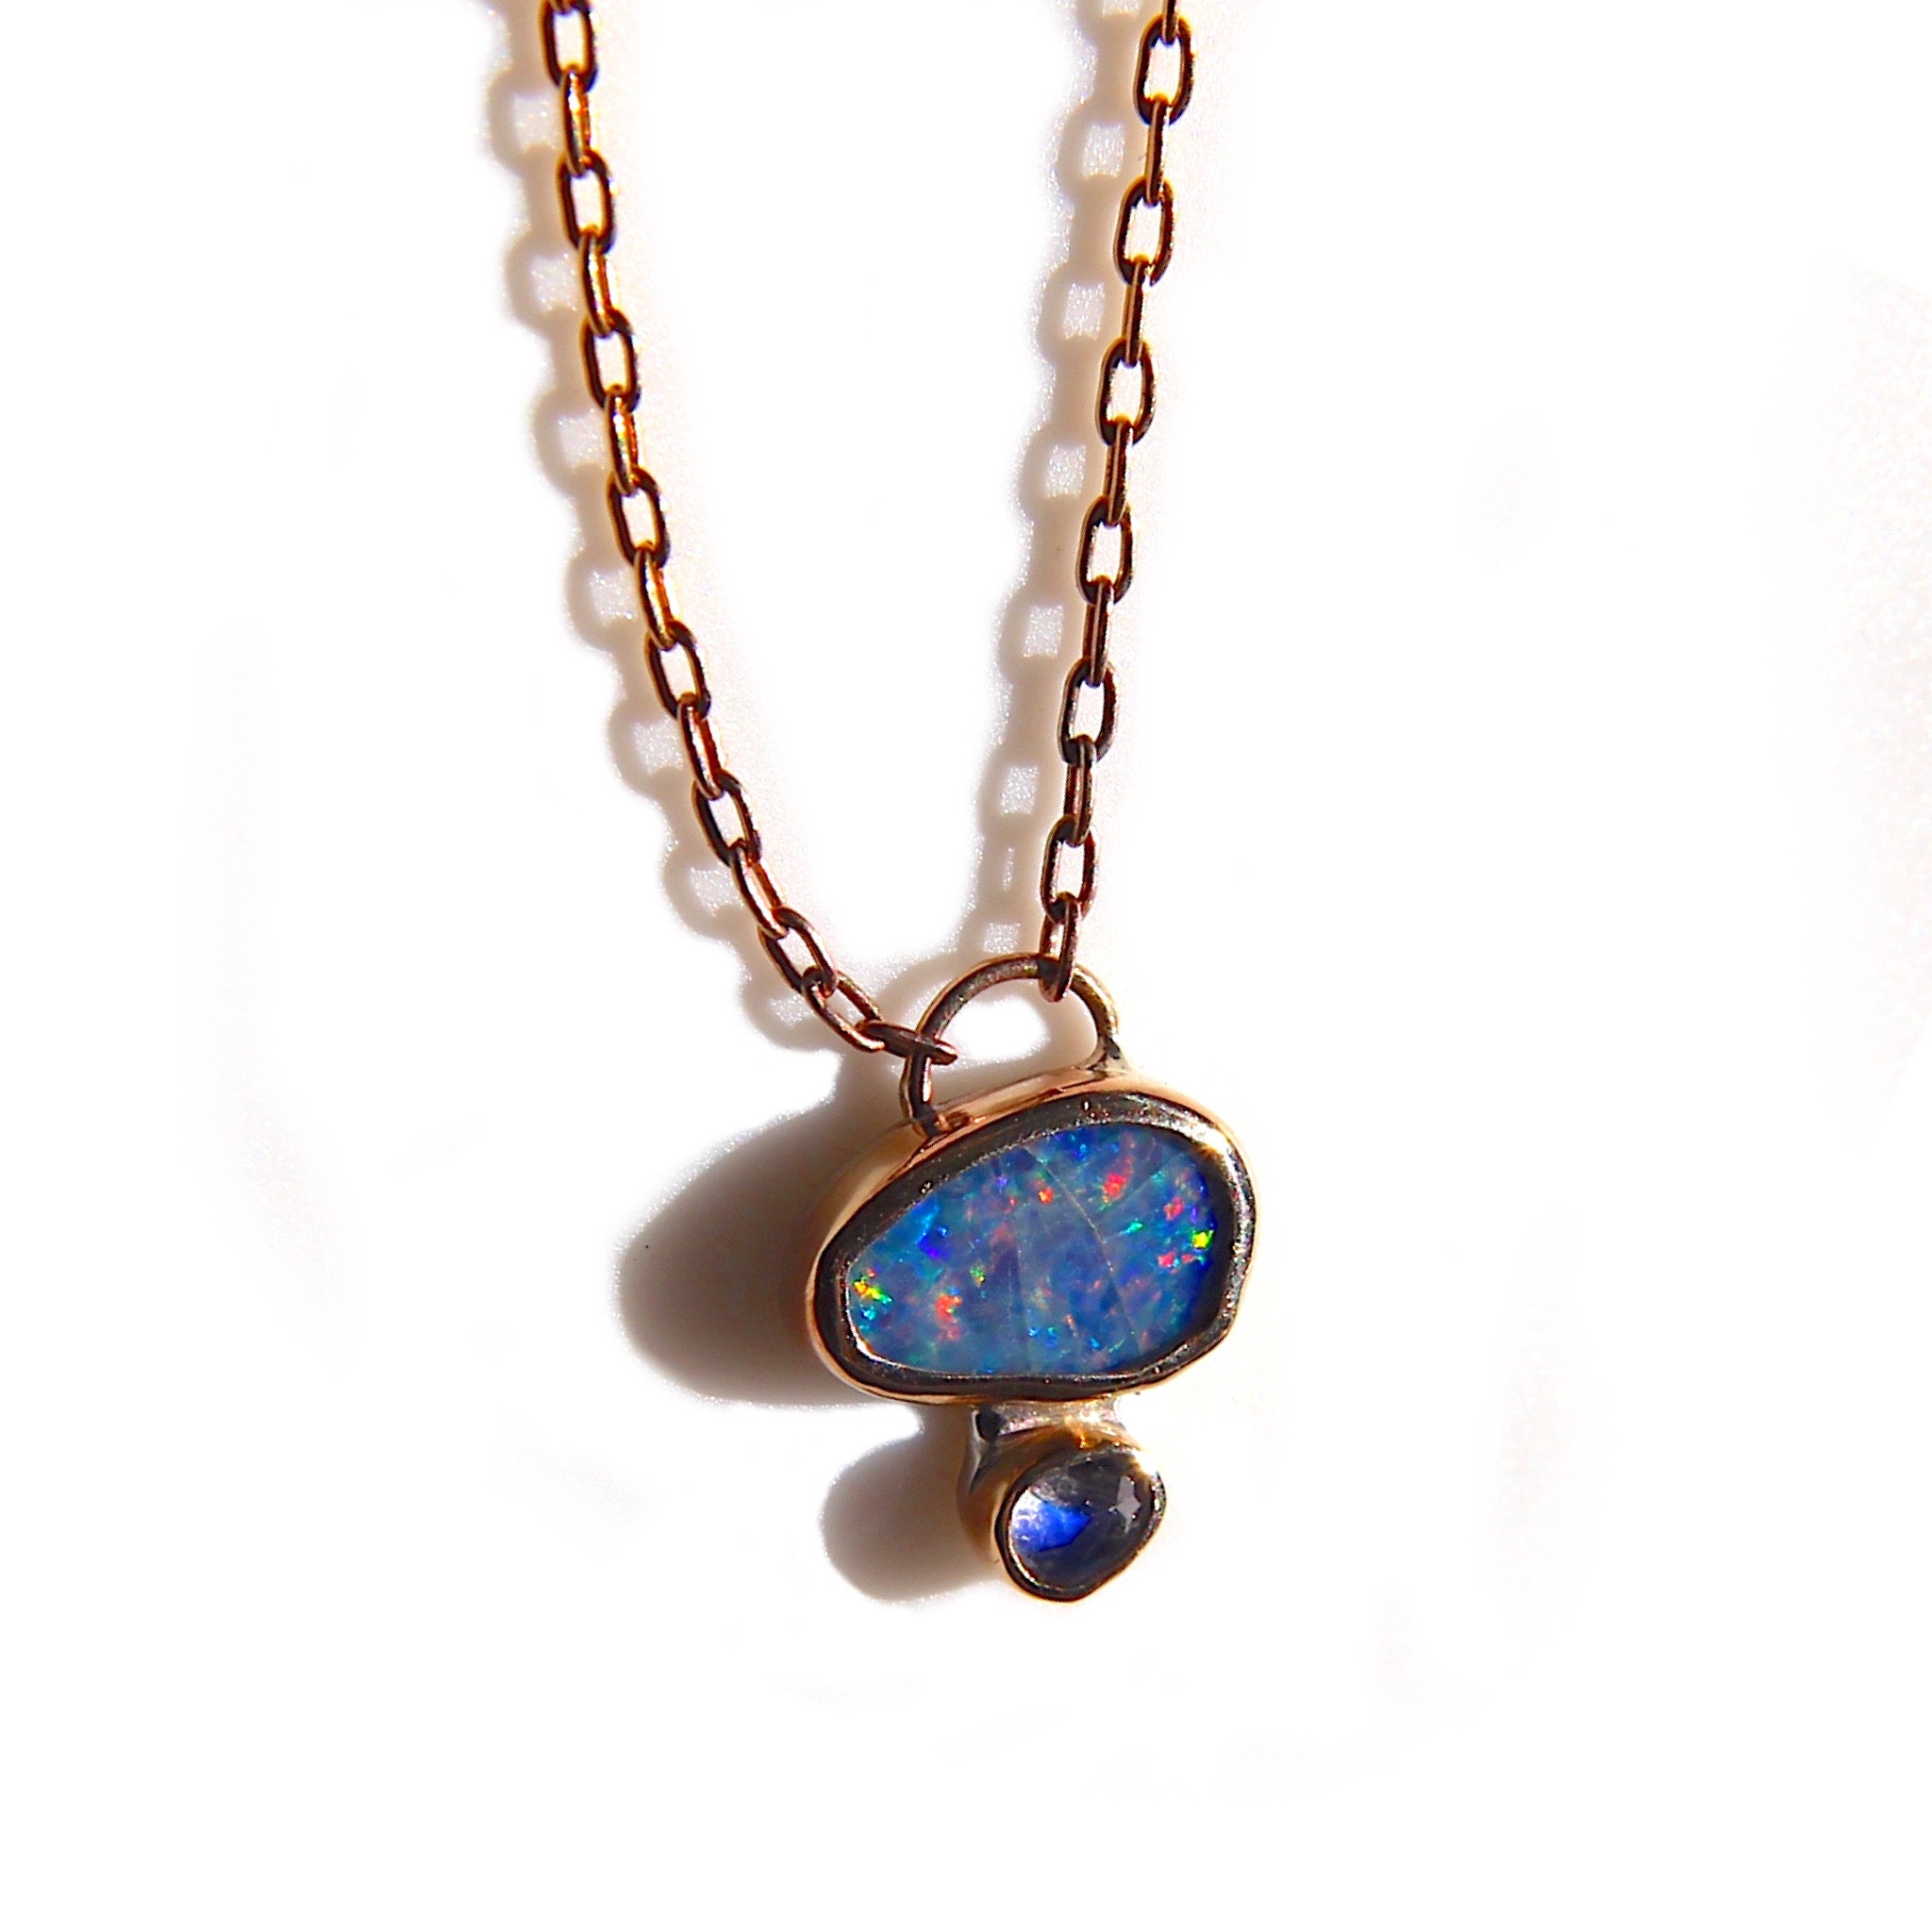 Opal & Moonstone necklace